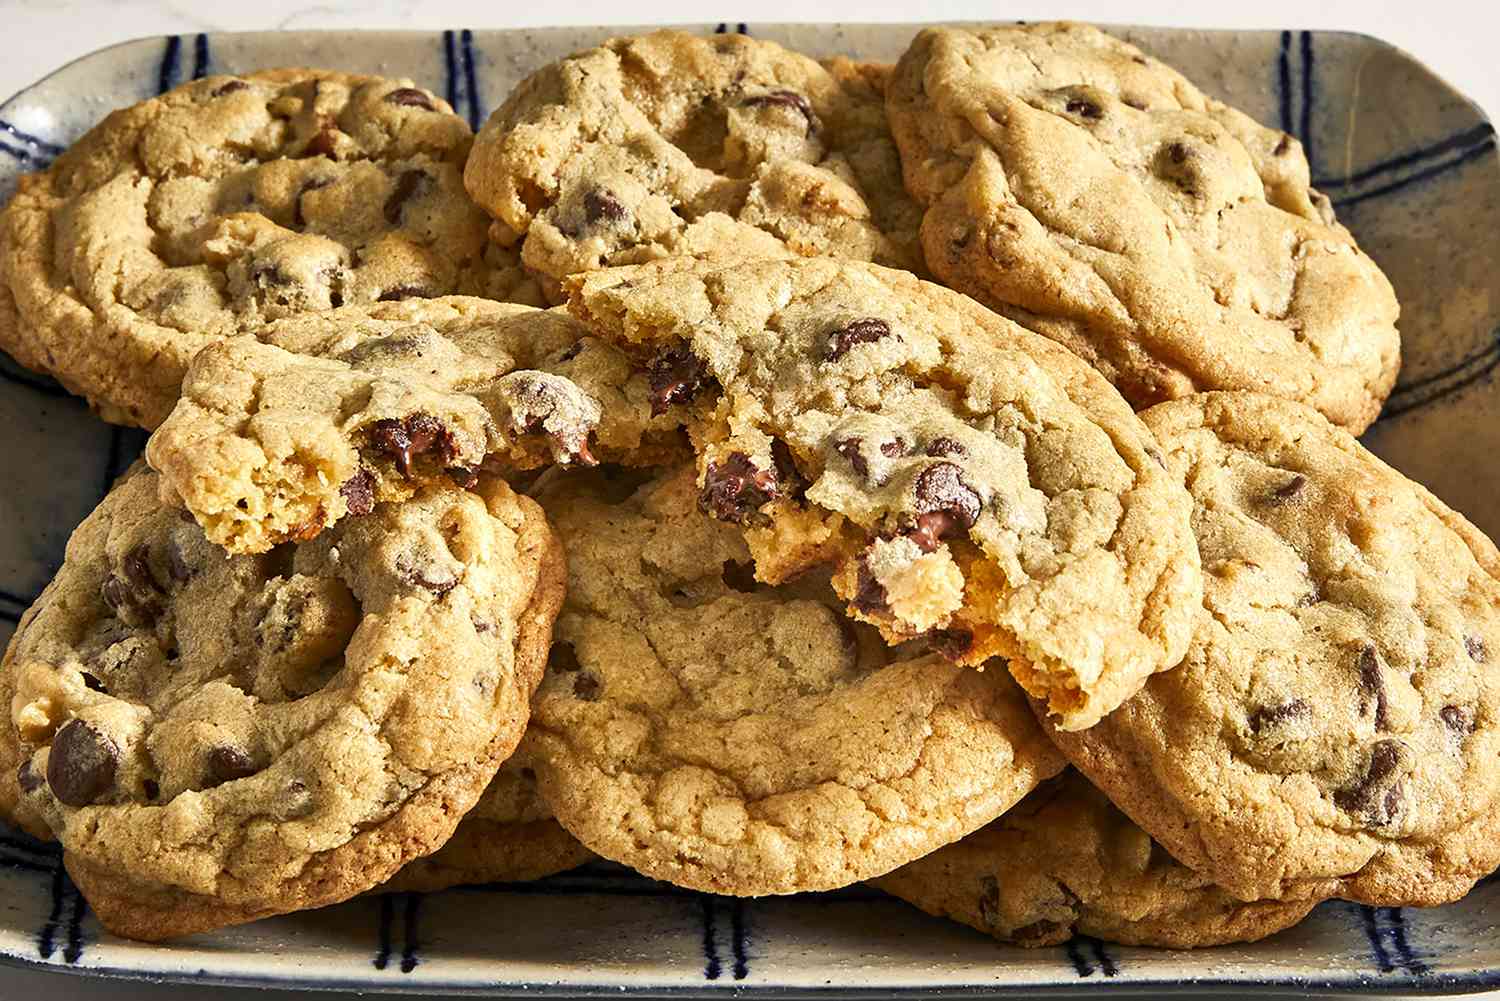 A close up view of a pile of best ever chocolate chip cookies with one broken in half